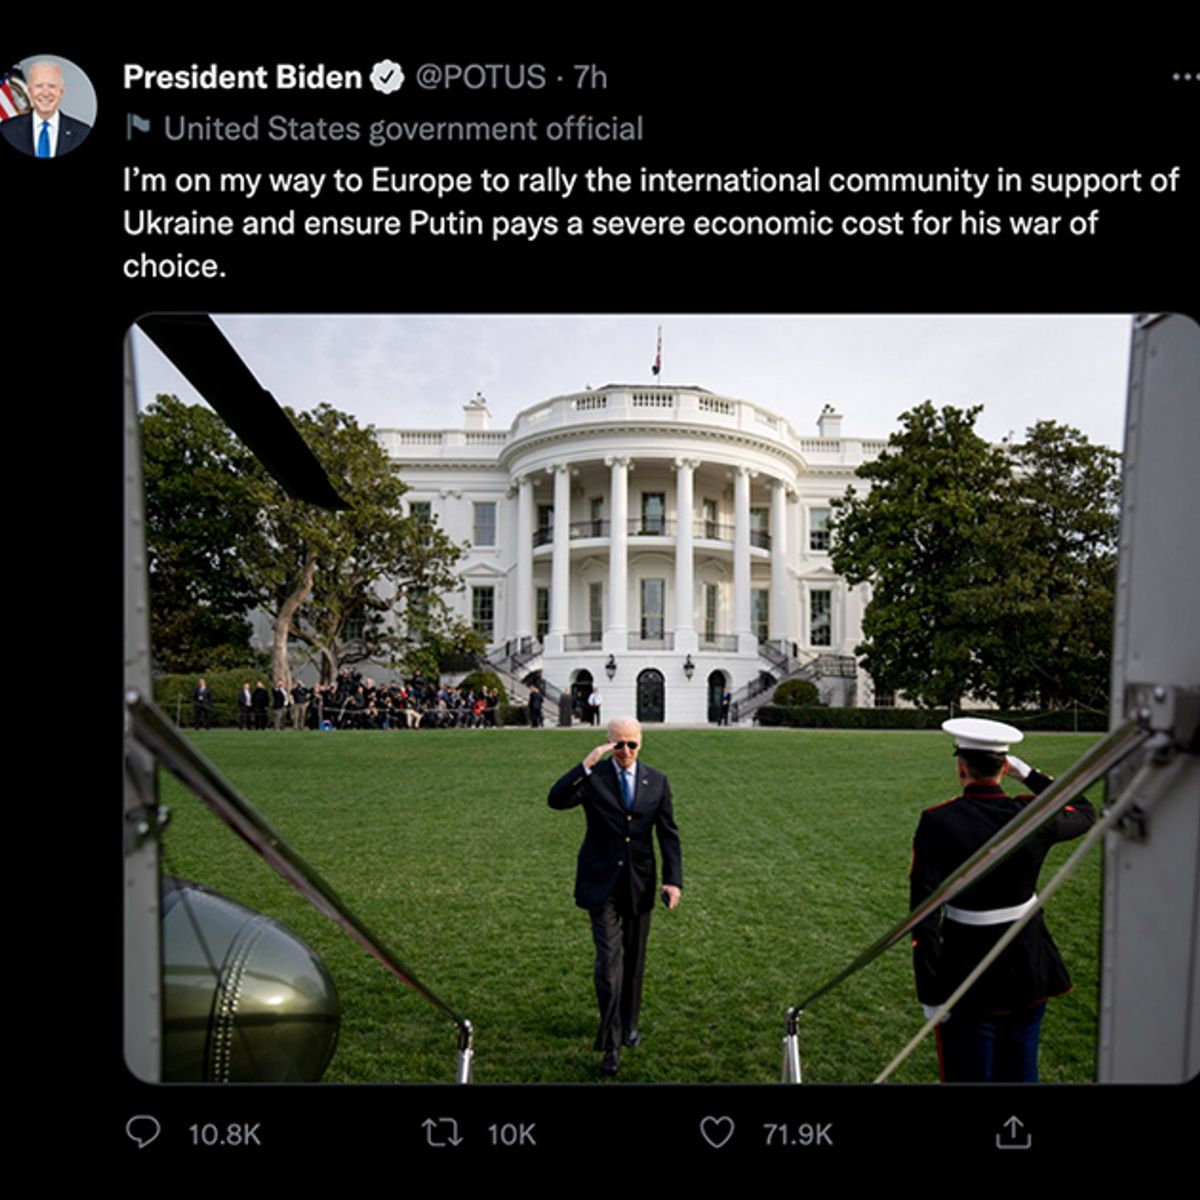 Did Biden Admin Stage a White House Photo with Fake Trees? 